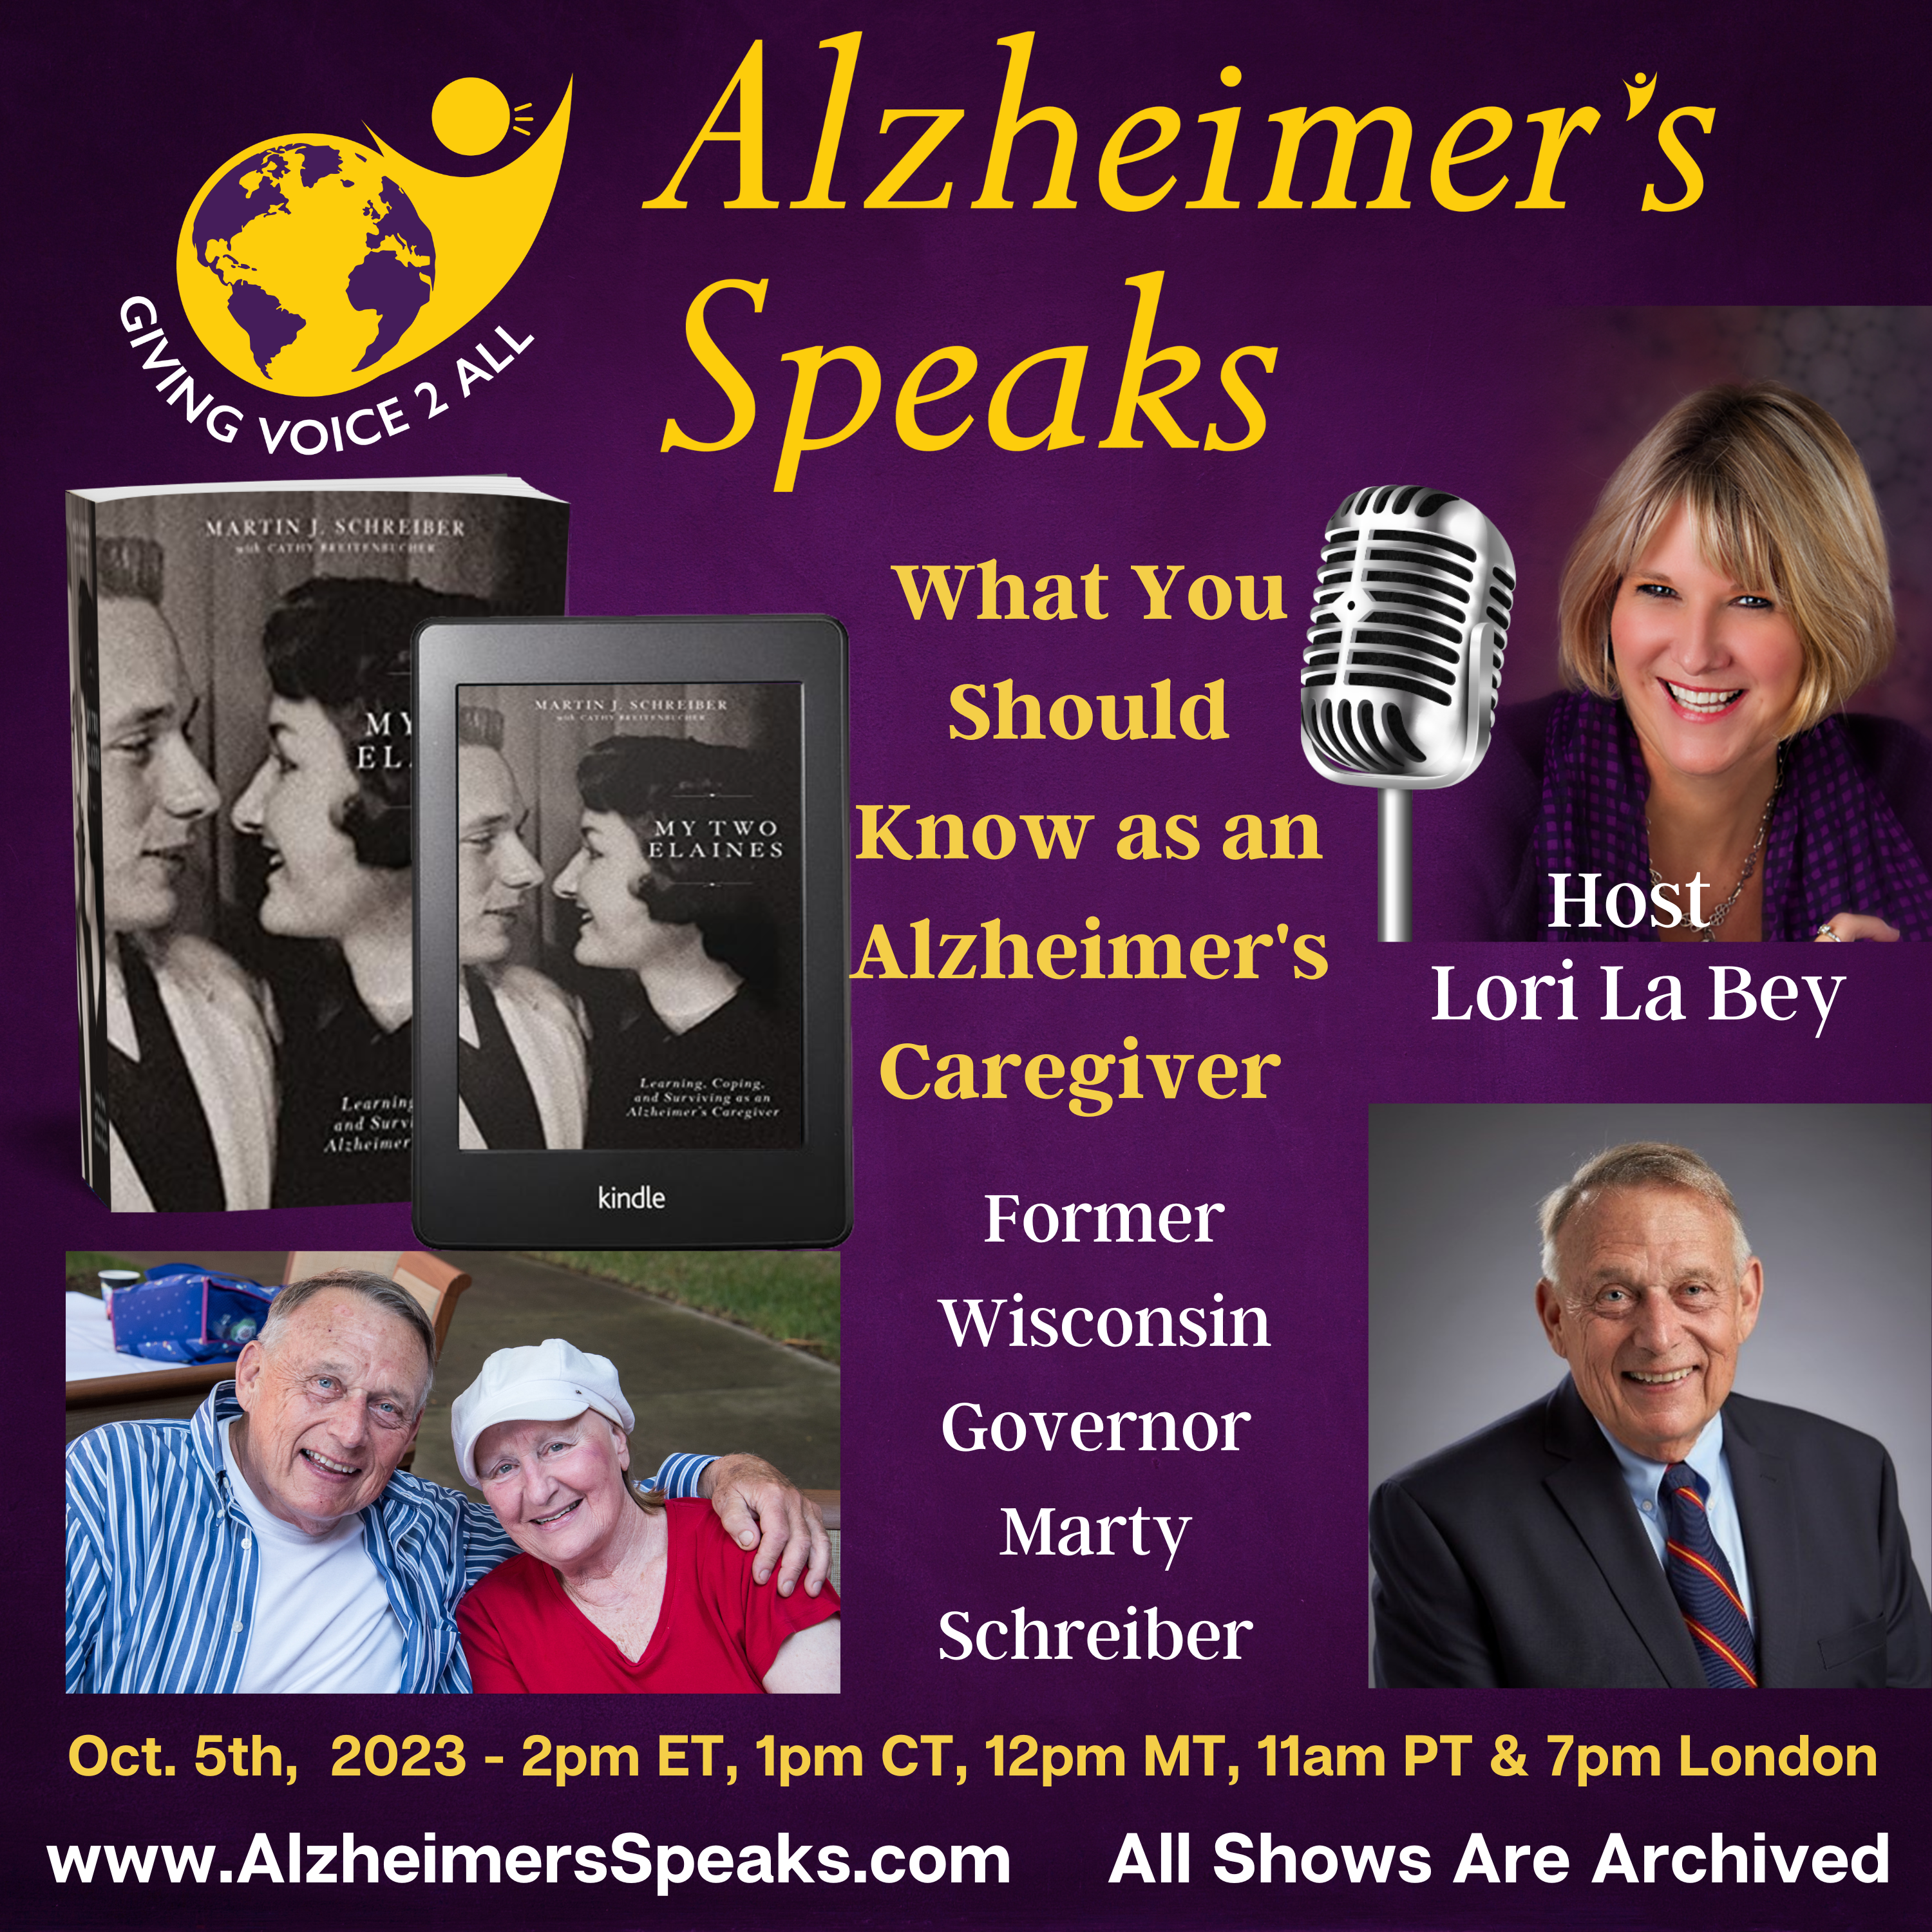 What You Should Know as an Alzheimer's Caregiver